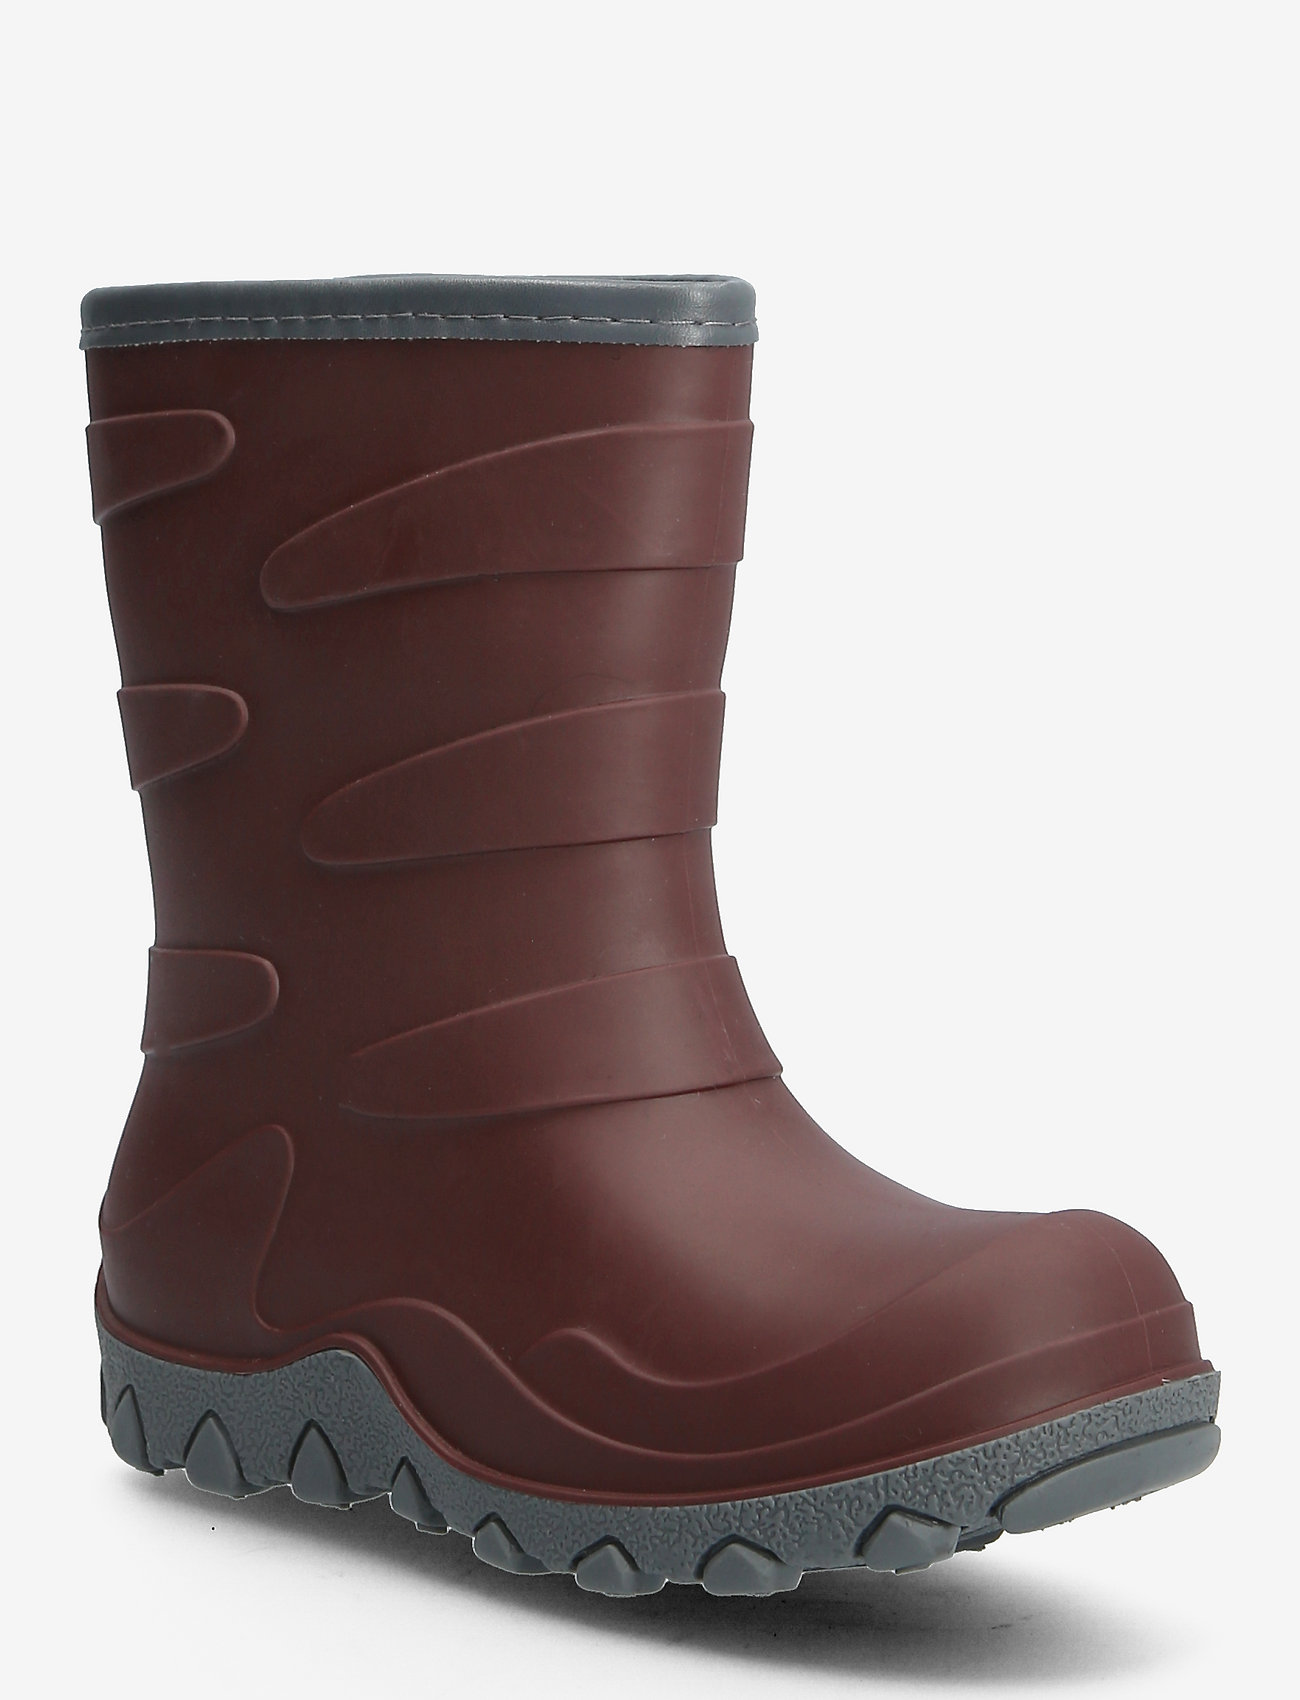 Mikk-Line Thermal Boot - Rubberboots | Boozt.com